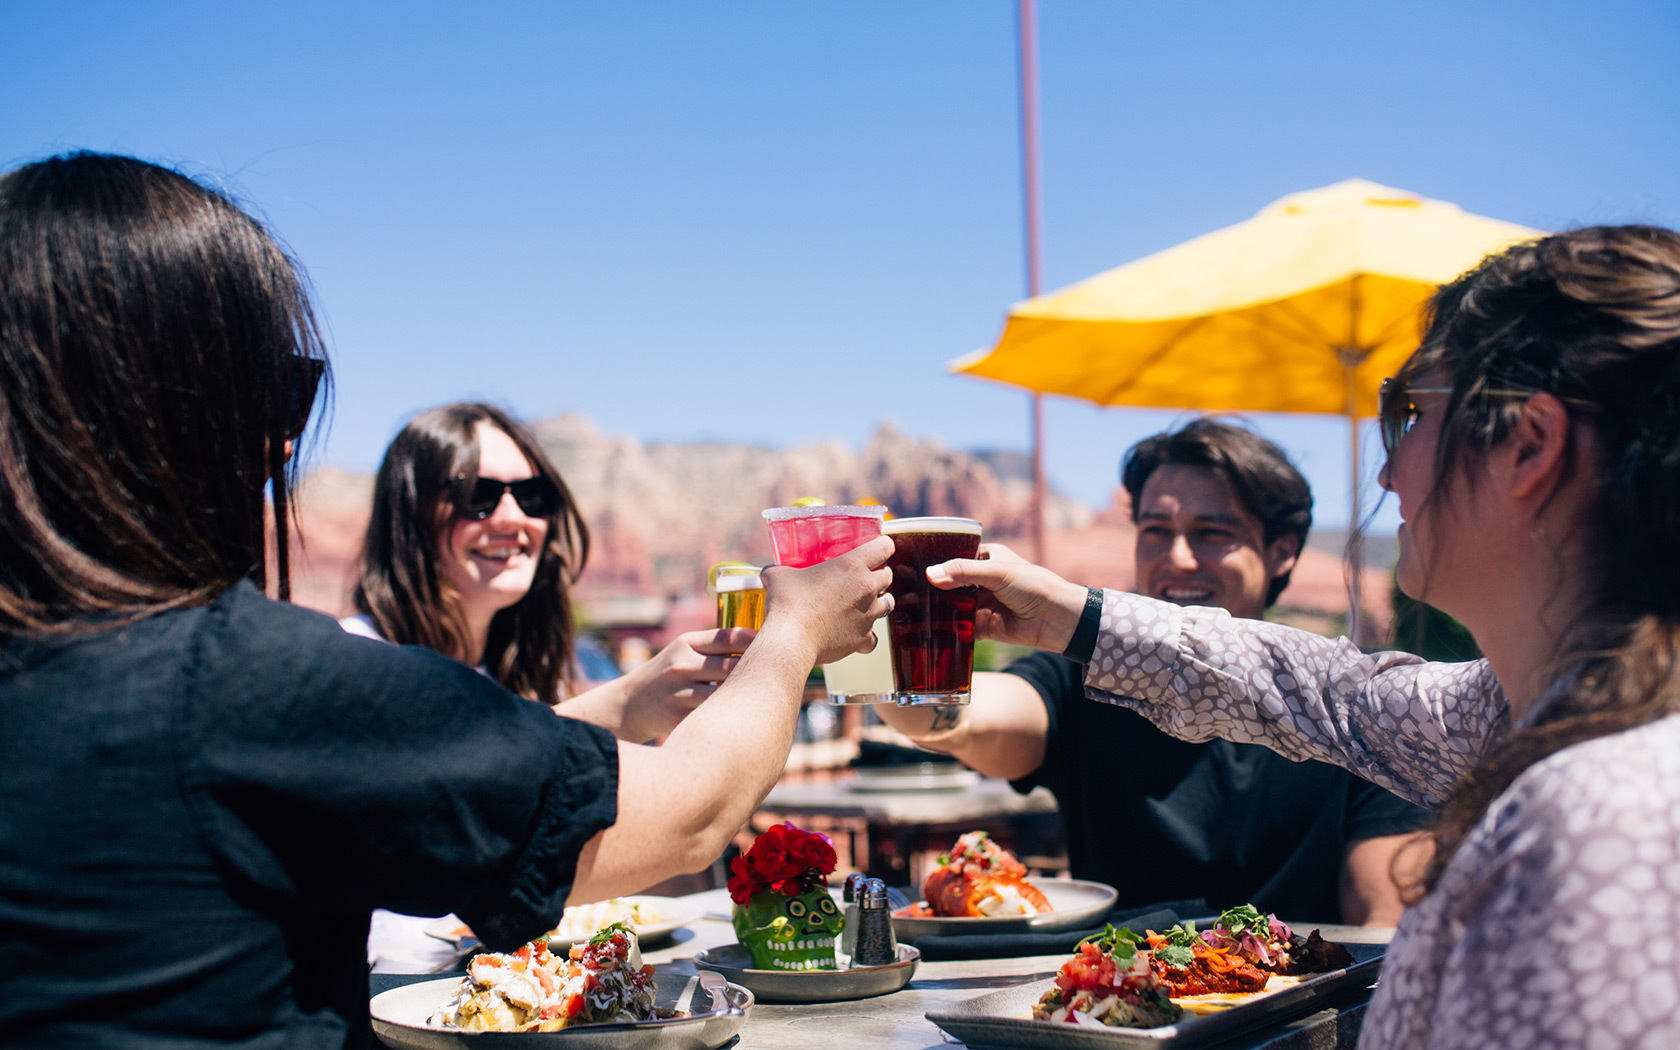 A group of friends enjoying a colorful lunch with colorful drinks on a sunny day at 89agave cantina